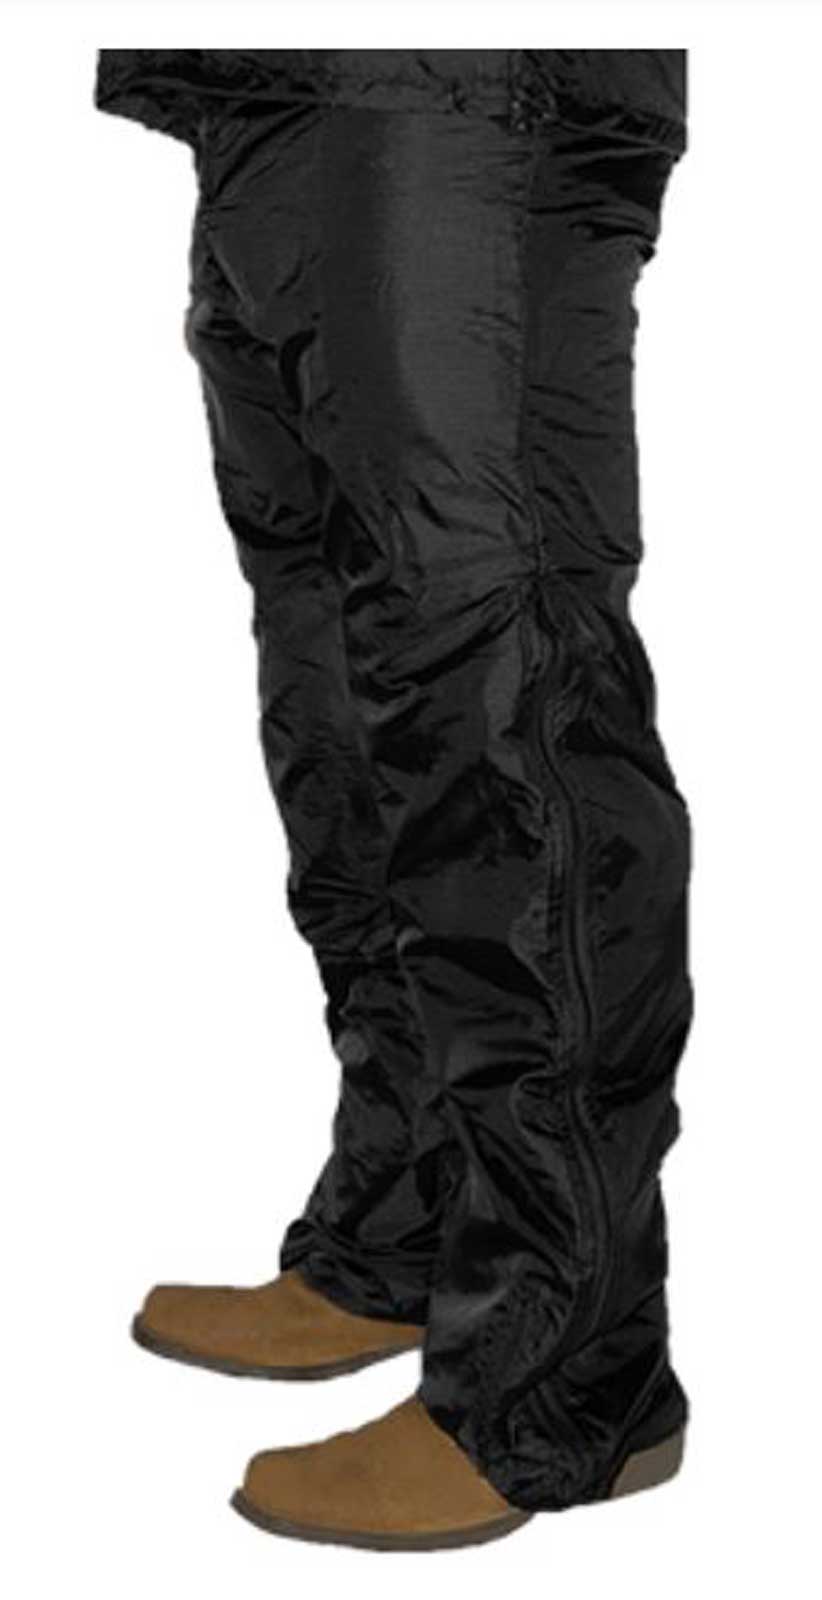 California Heat 12V Heated Wind Resistant / Water Repellent Pant